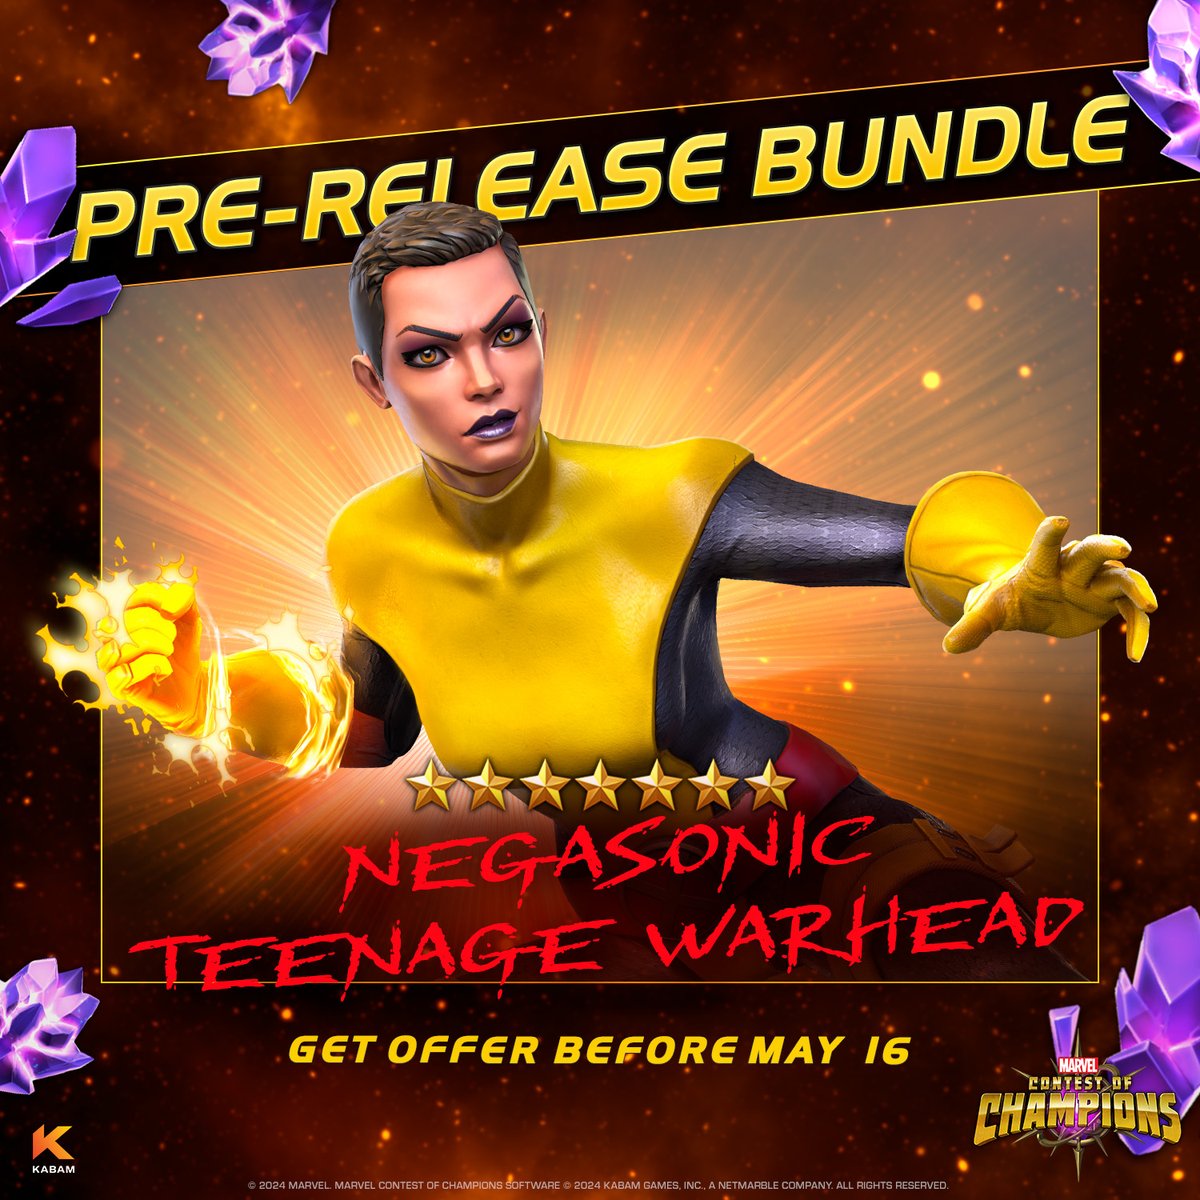 Get ready to unleash devastation with Negasonic Teenage Warhead. All Pre-Release Bundles listed GUARANTEE that Negasonic Teenage Warhead will be joining your team bit.ly/3UuhRjZ